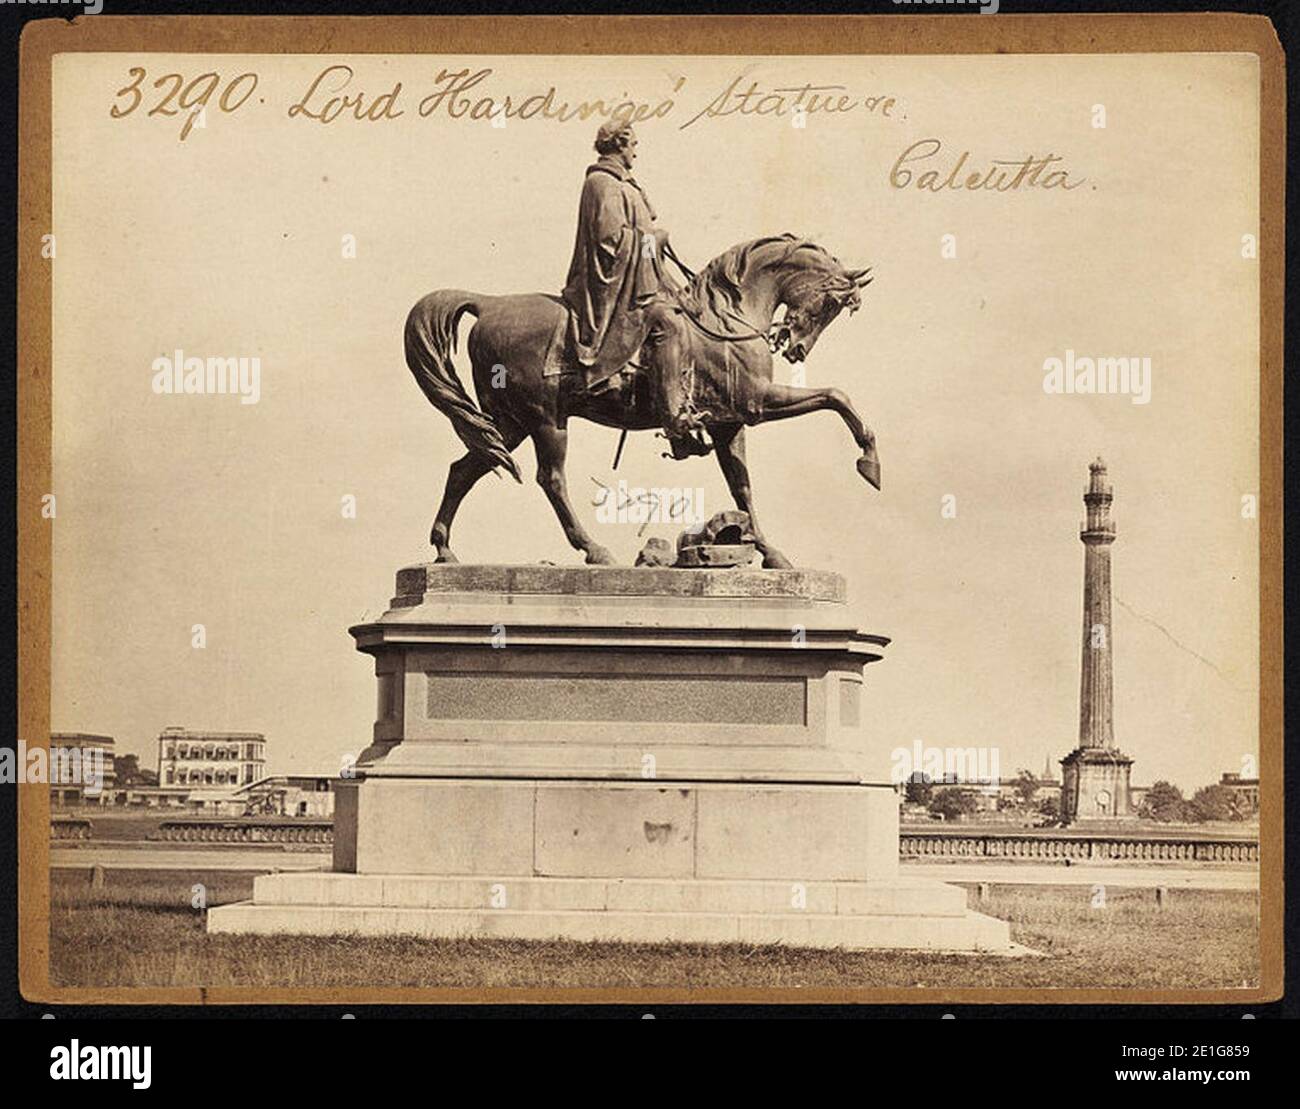 Lord Hardinge's Statue in Calcutta by Francis Frith. Stock Photo